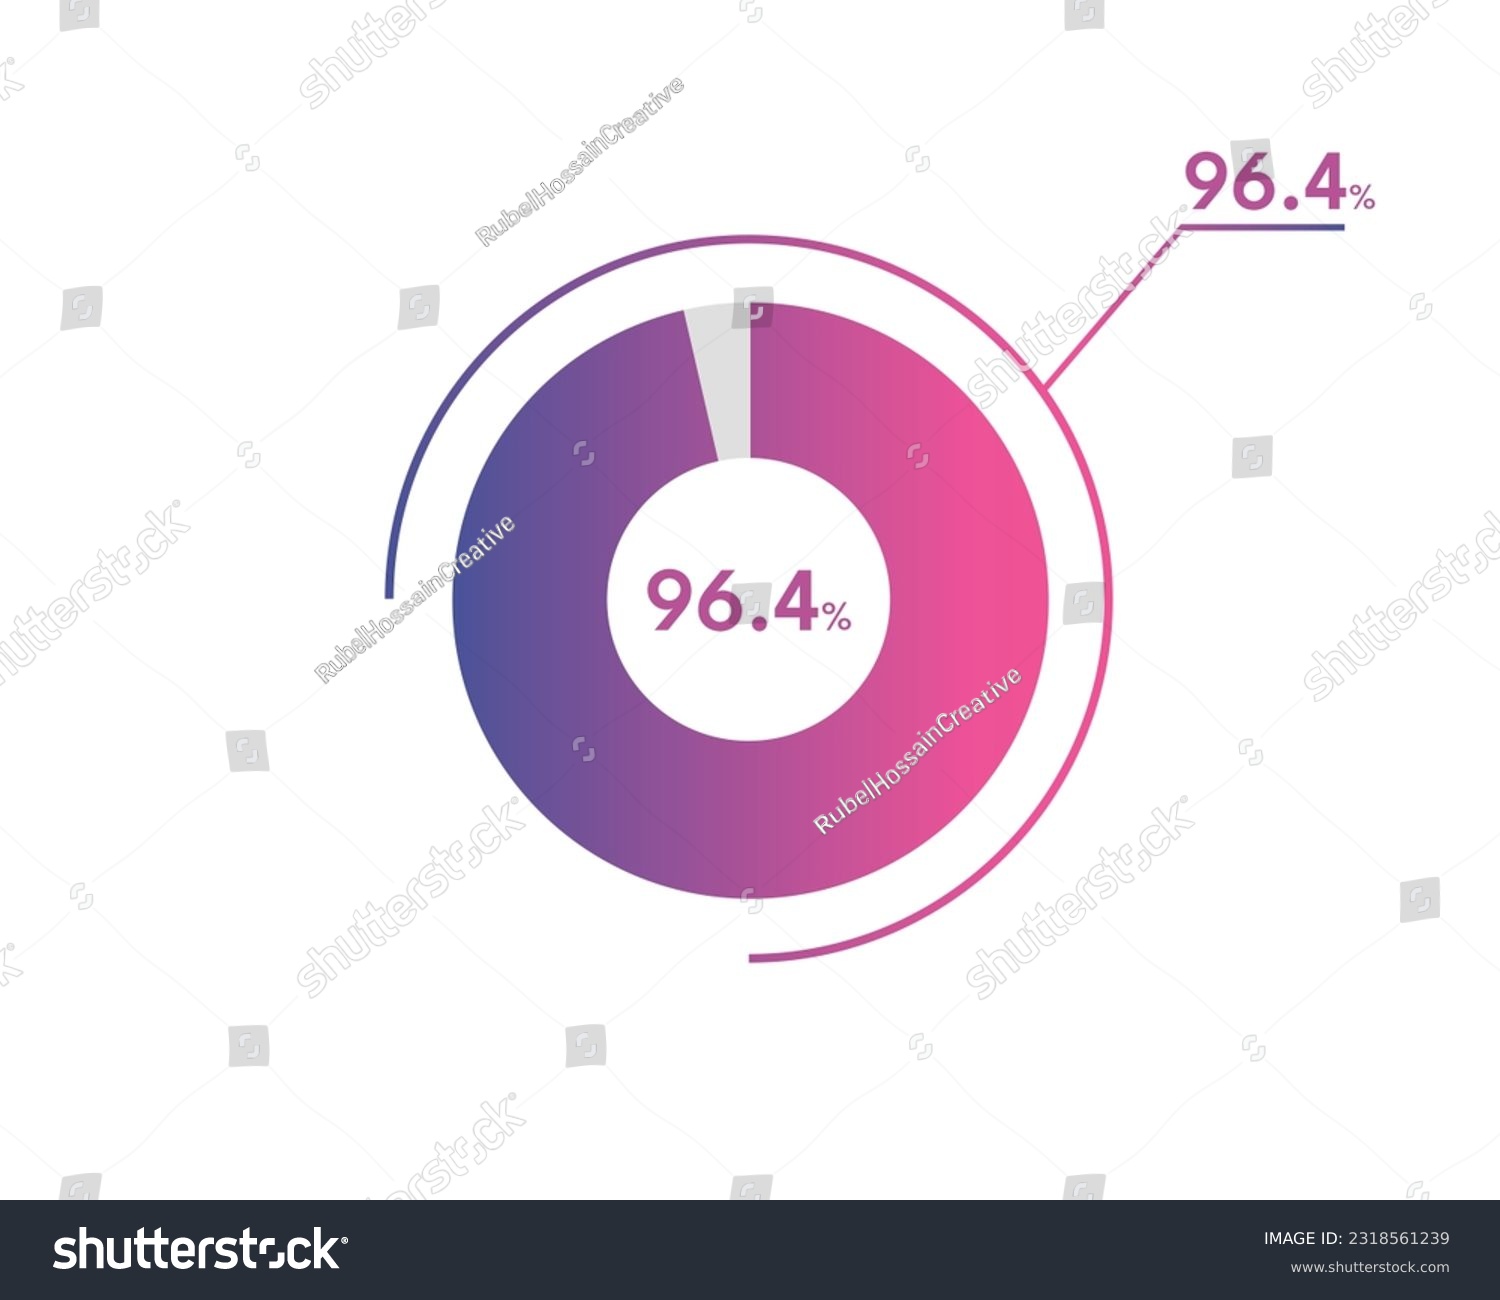 SVG of 96.4 Percentage circle diagrams Infographics vector, circle diagram business illustration, Designing the 96.4% Segment in the Pie Chart. svg